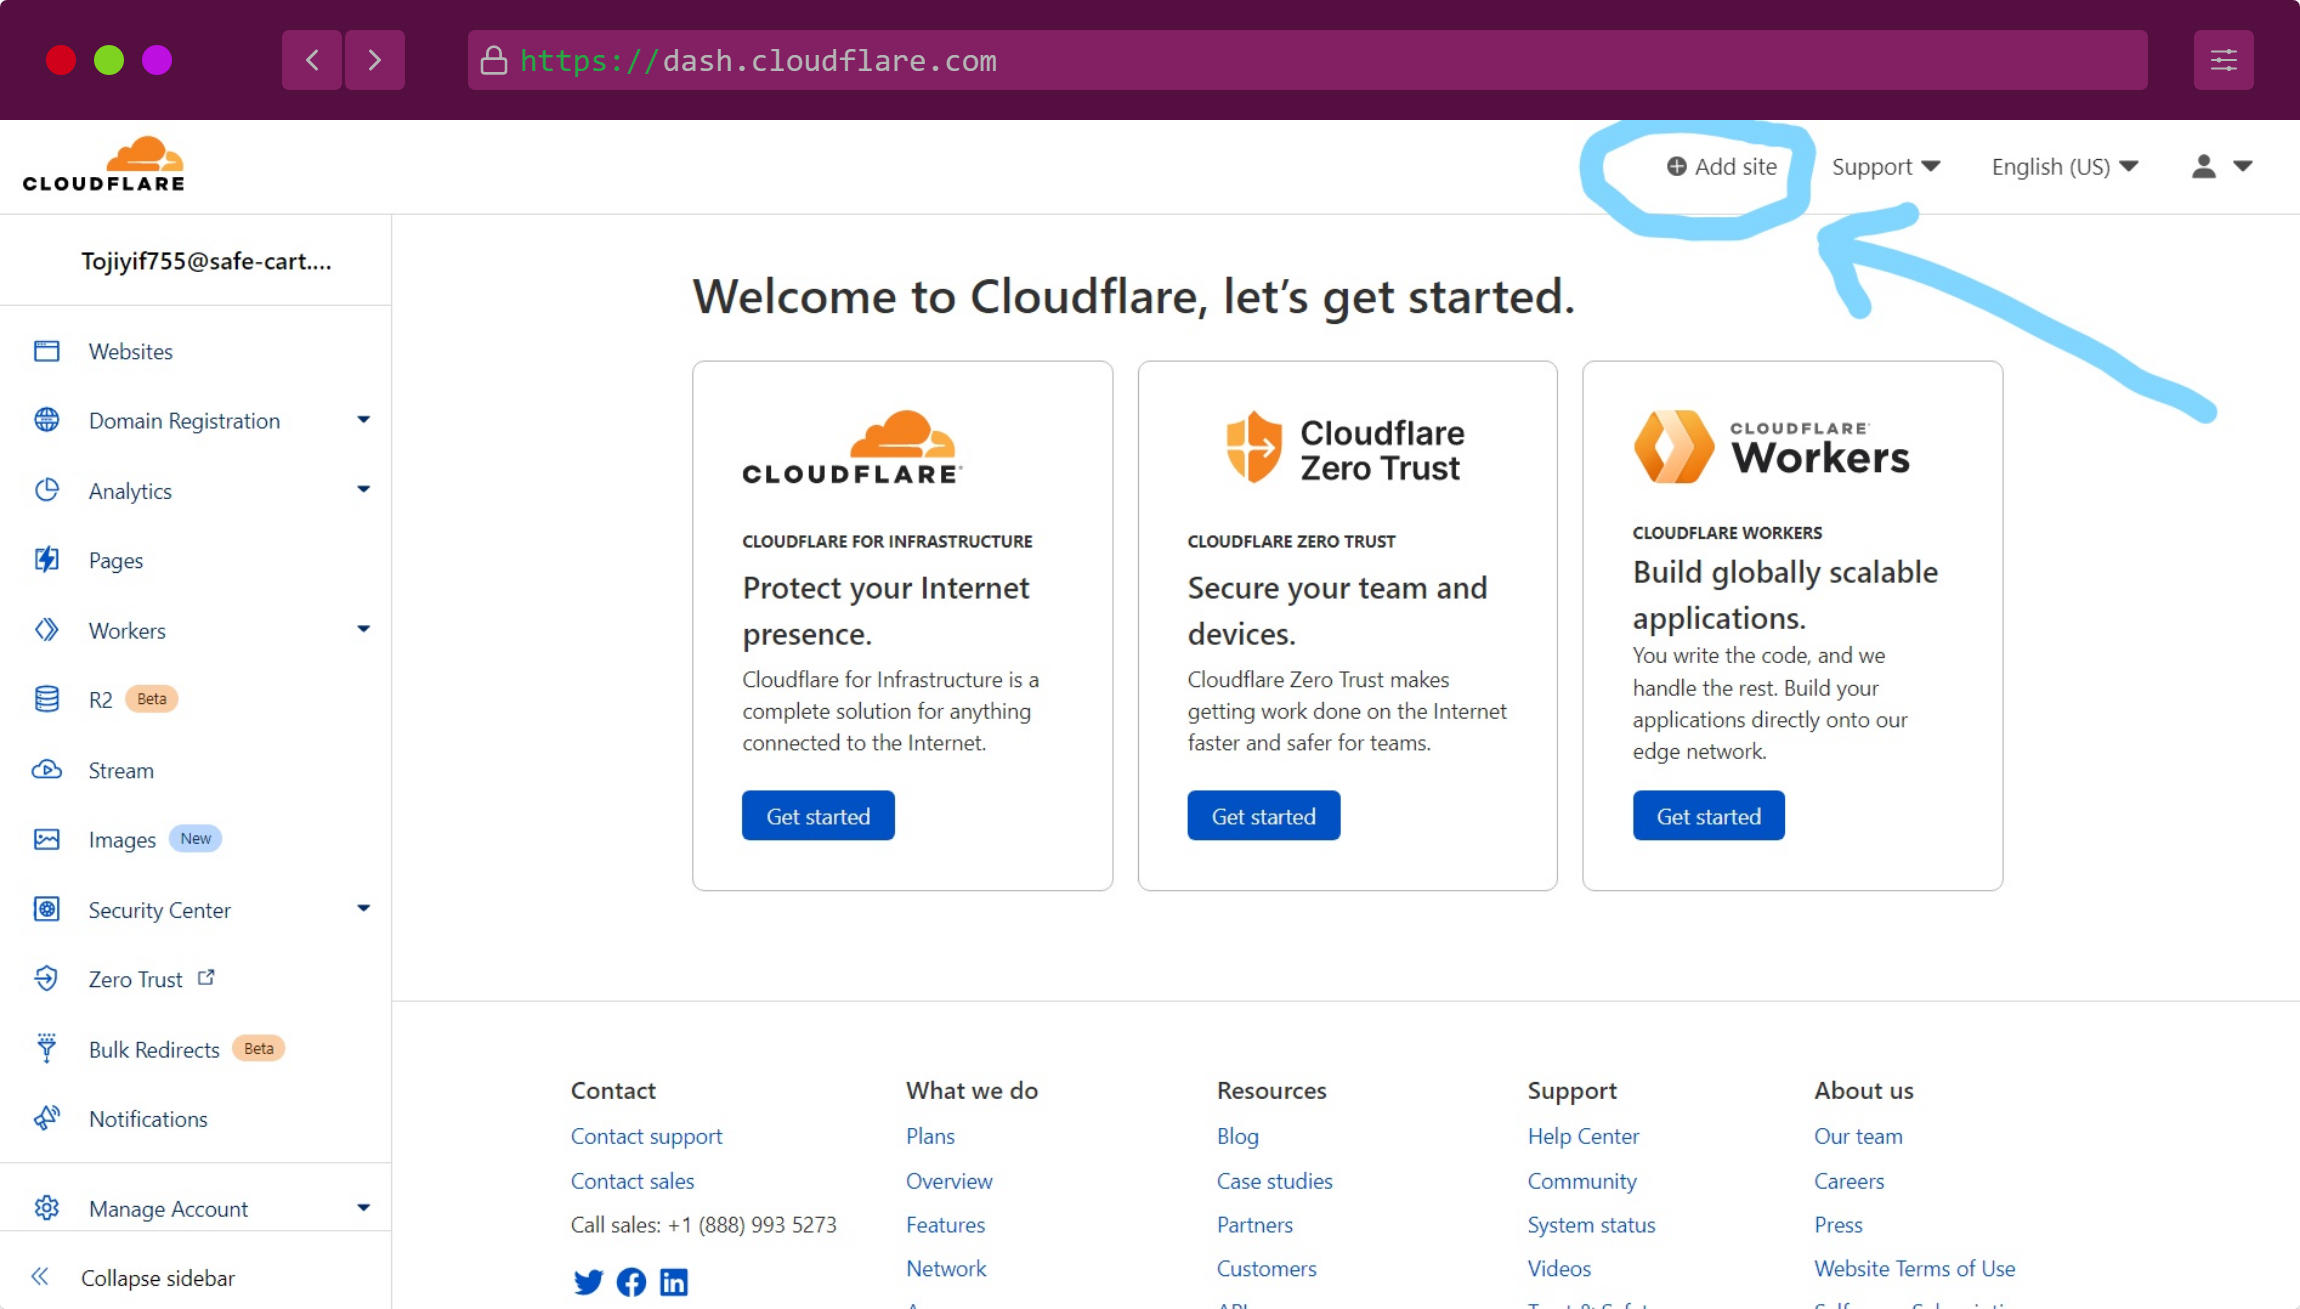 cloudflare after sign up page